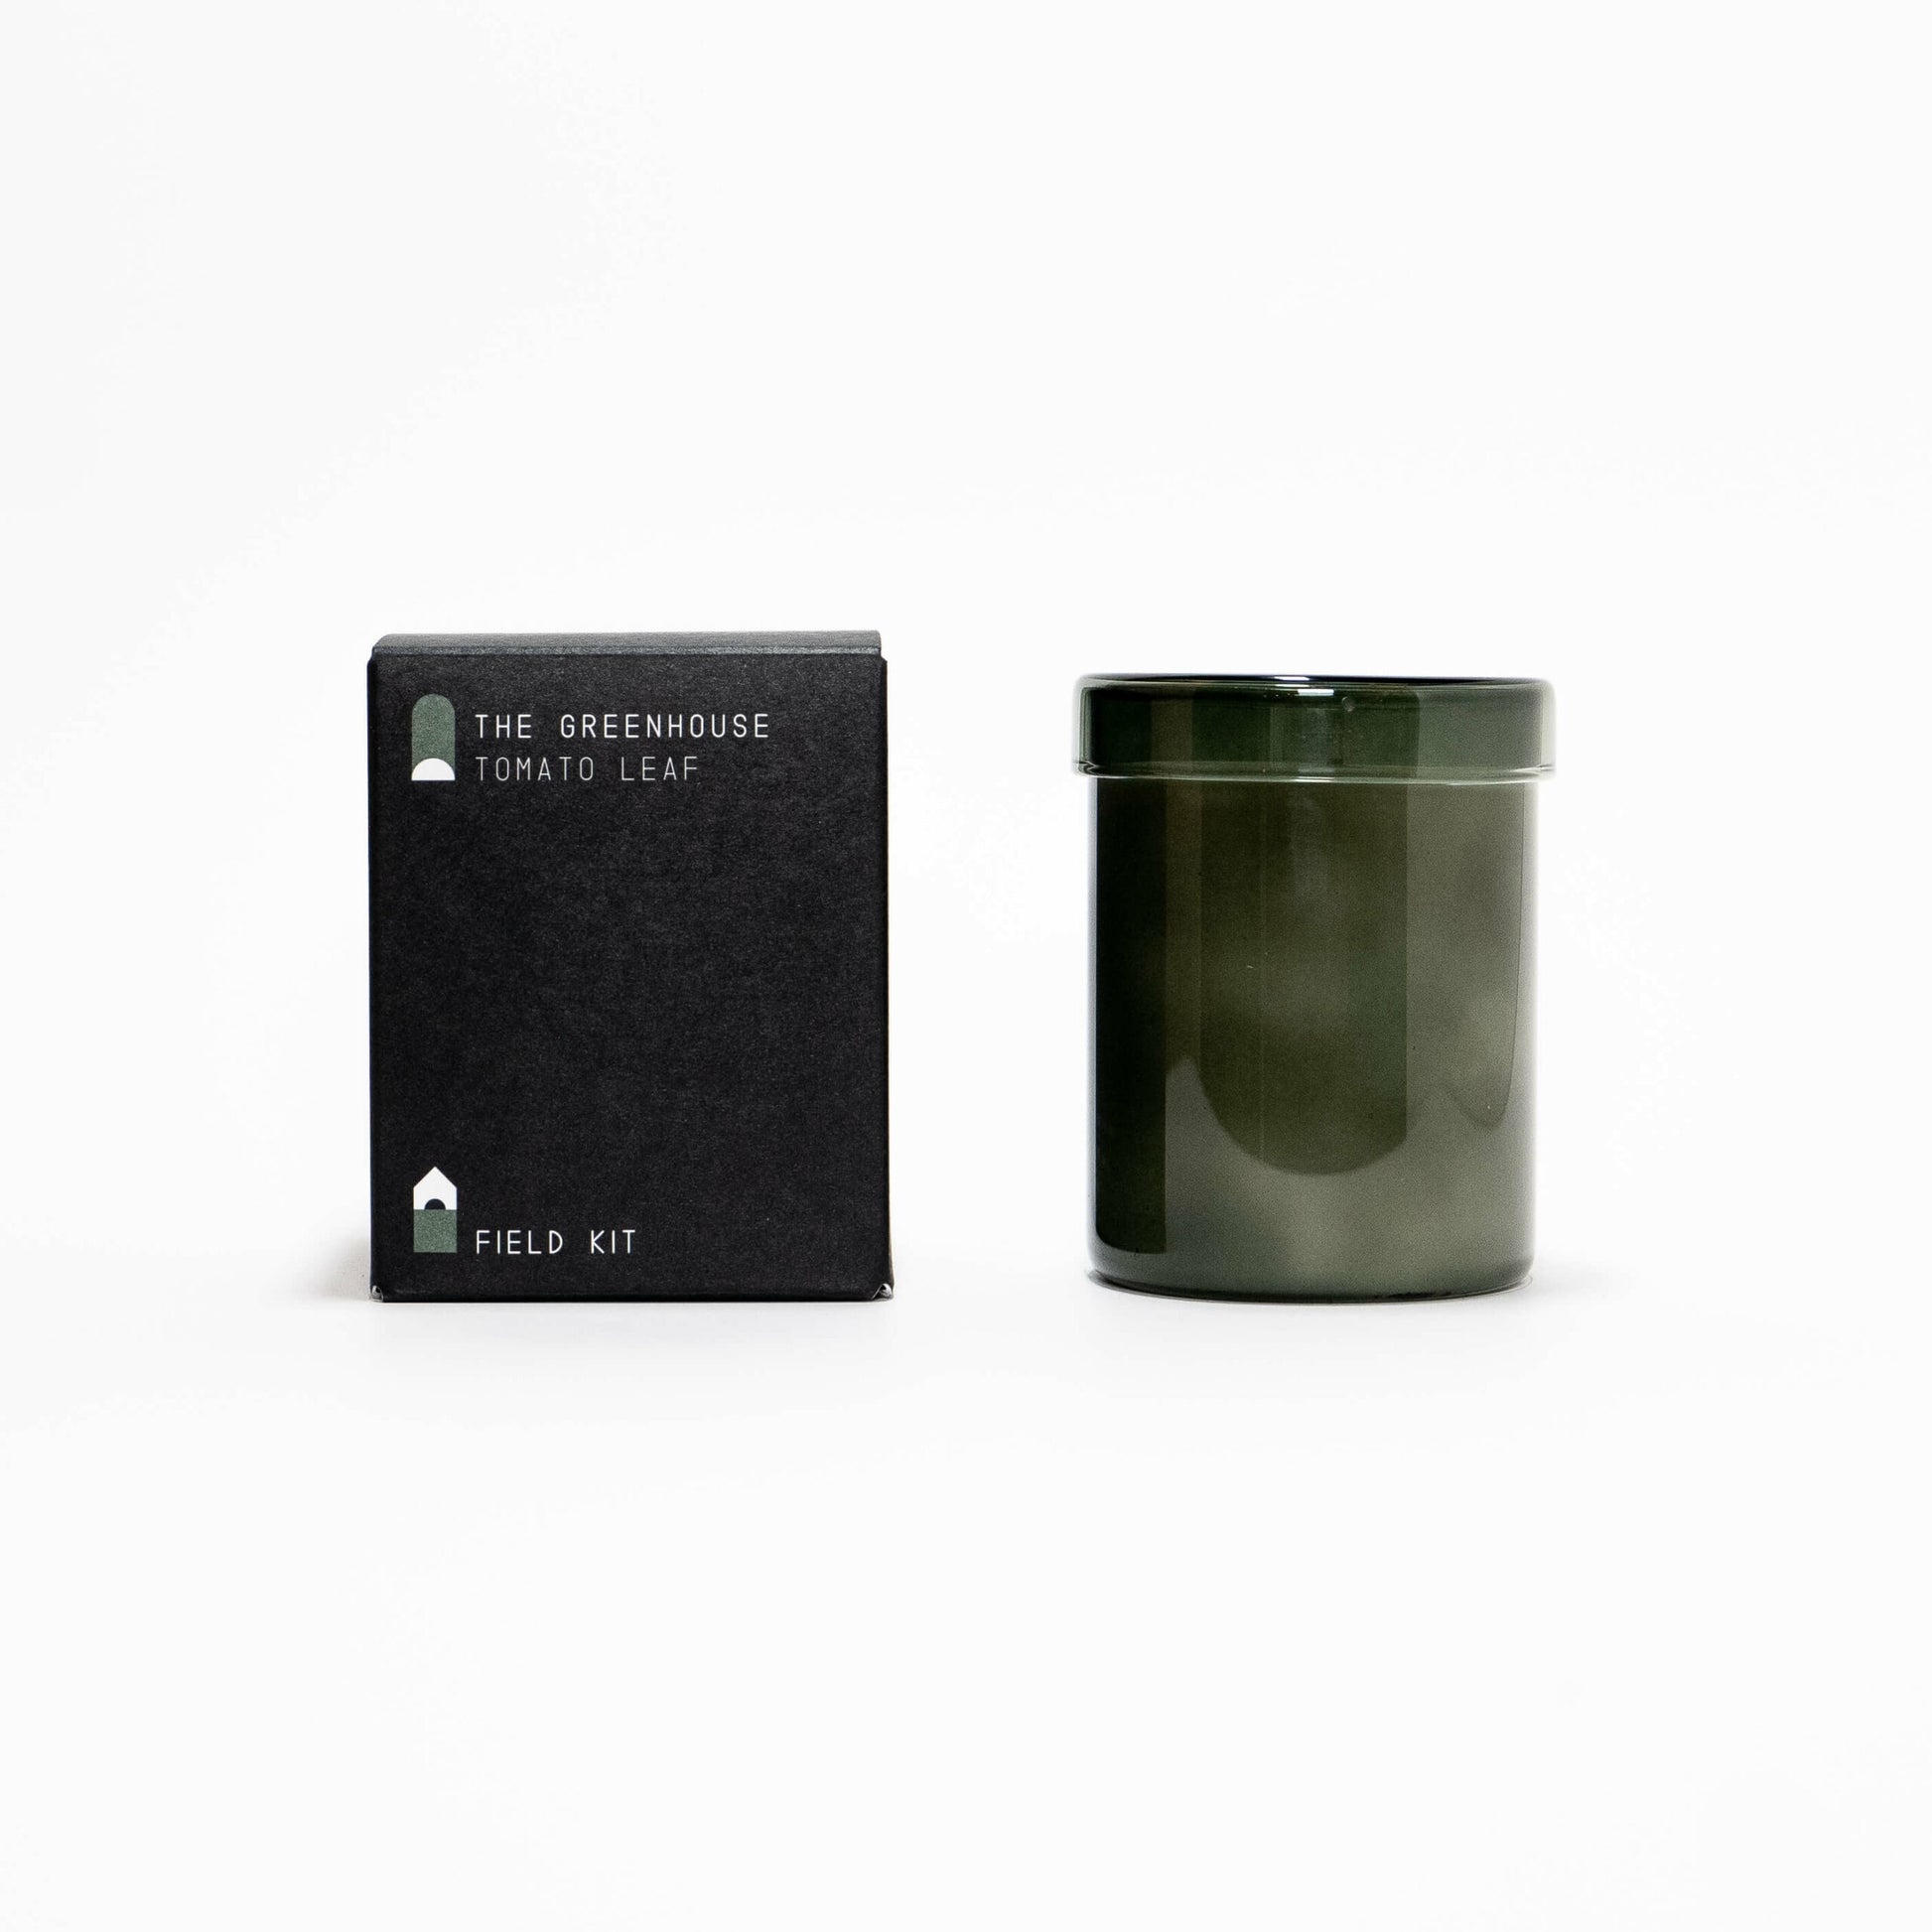 The Greenhouse Scented Candle by Field Kit